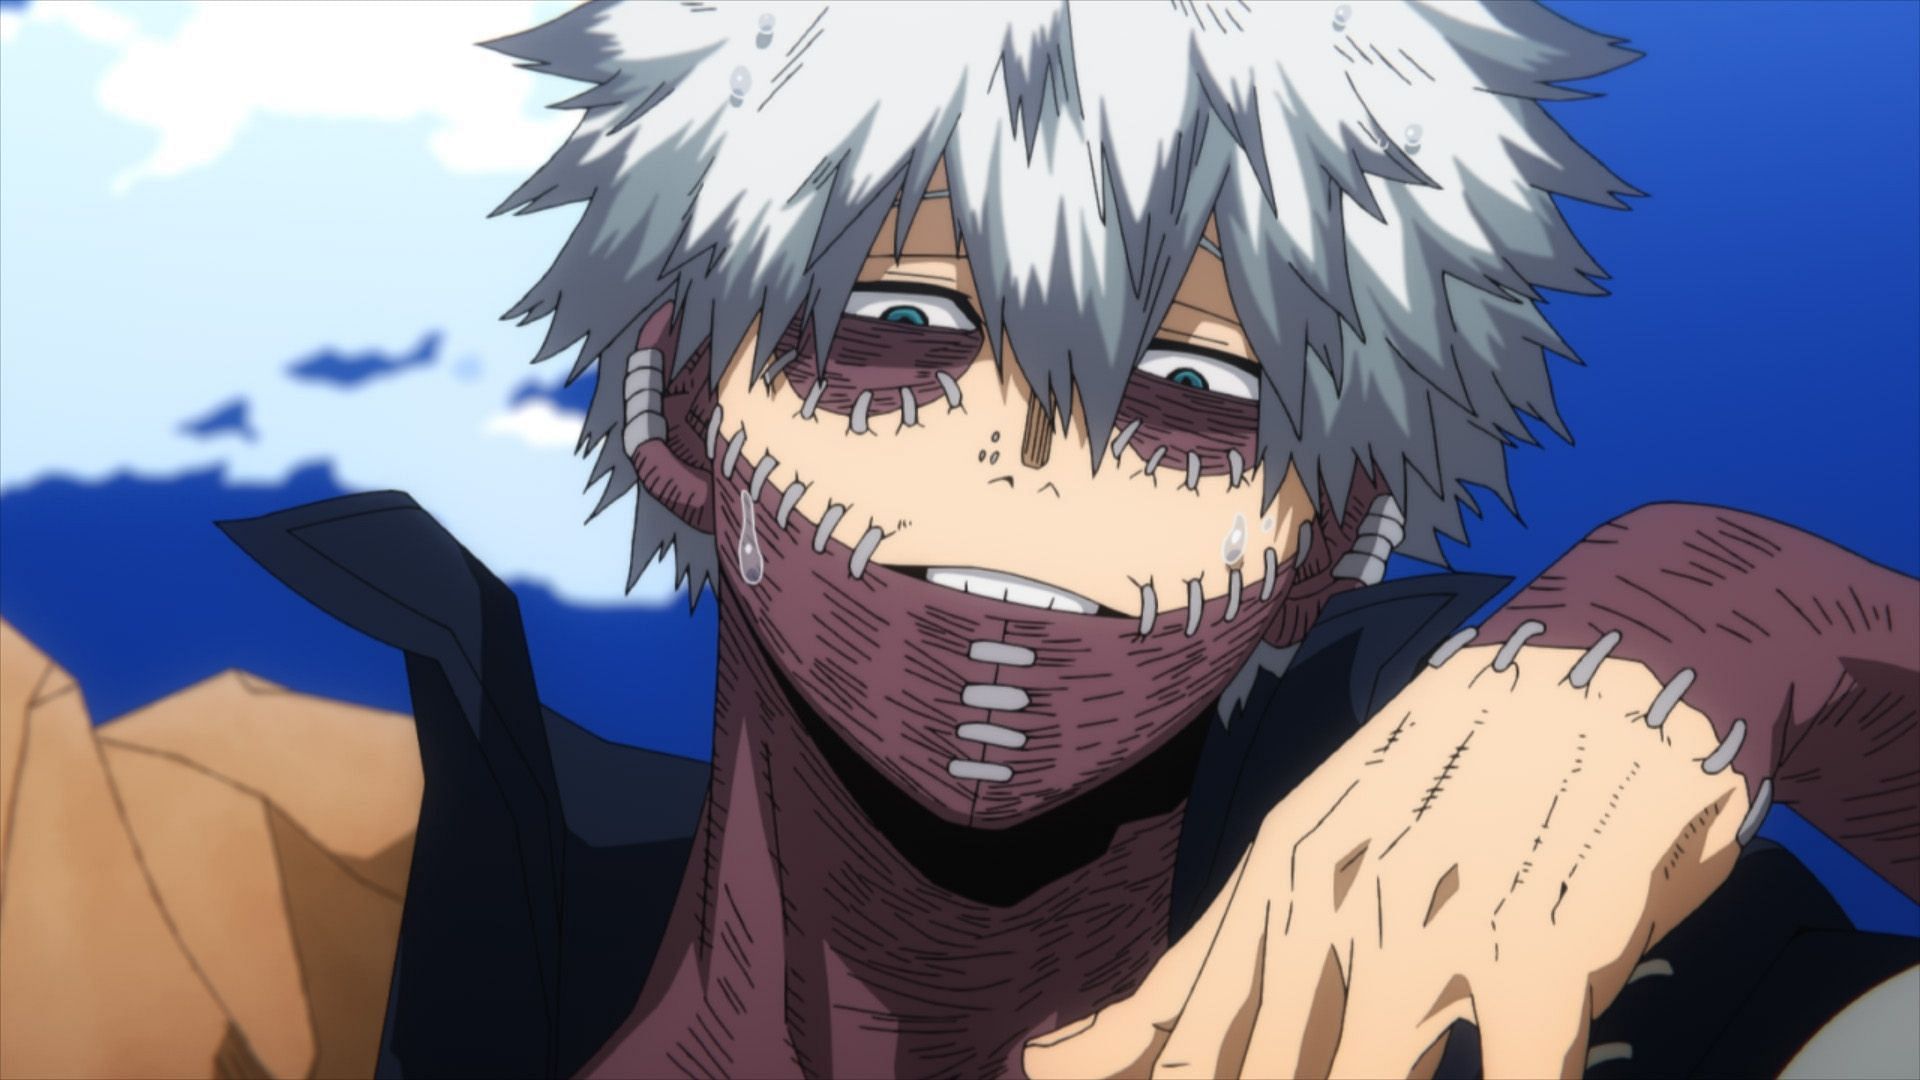 Toya seen after revealing his Dabi persona to be a disguise (Image via Studio Bones)